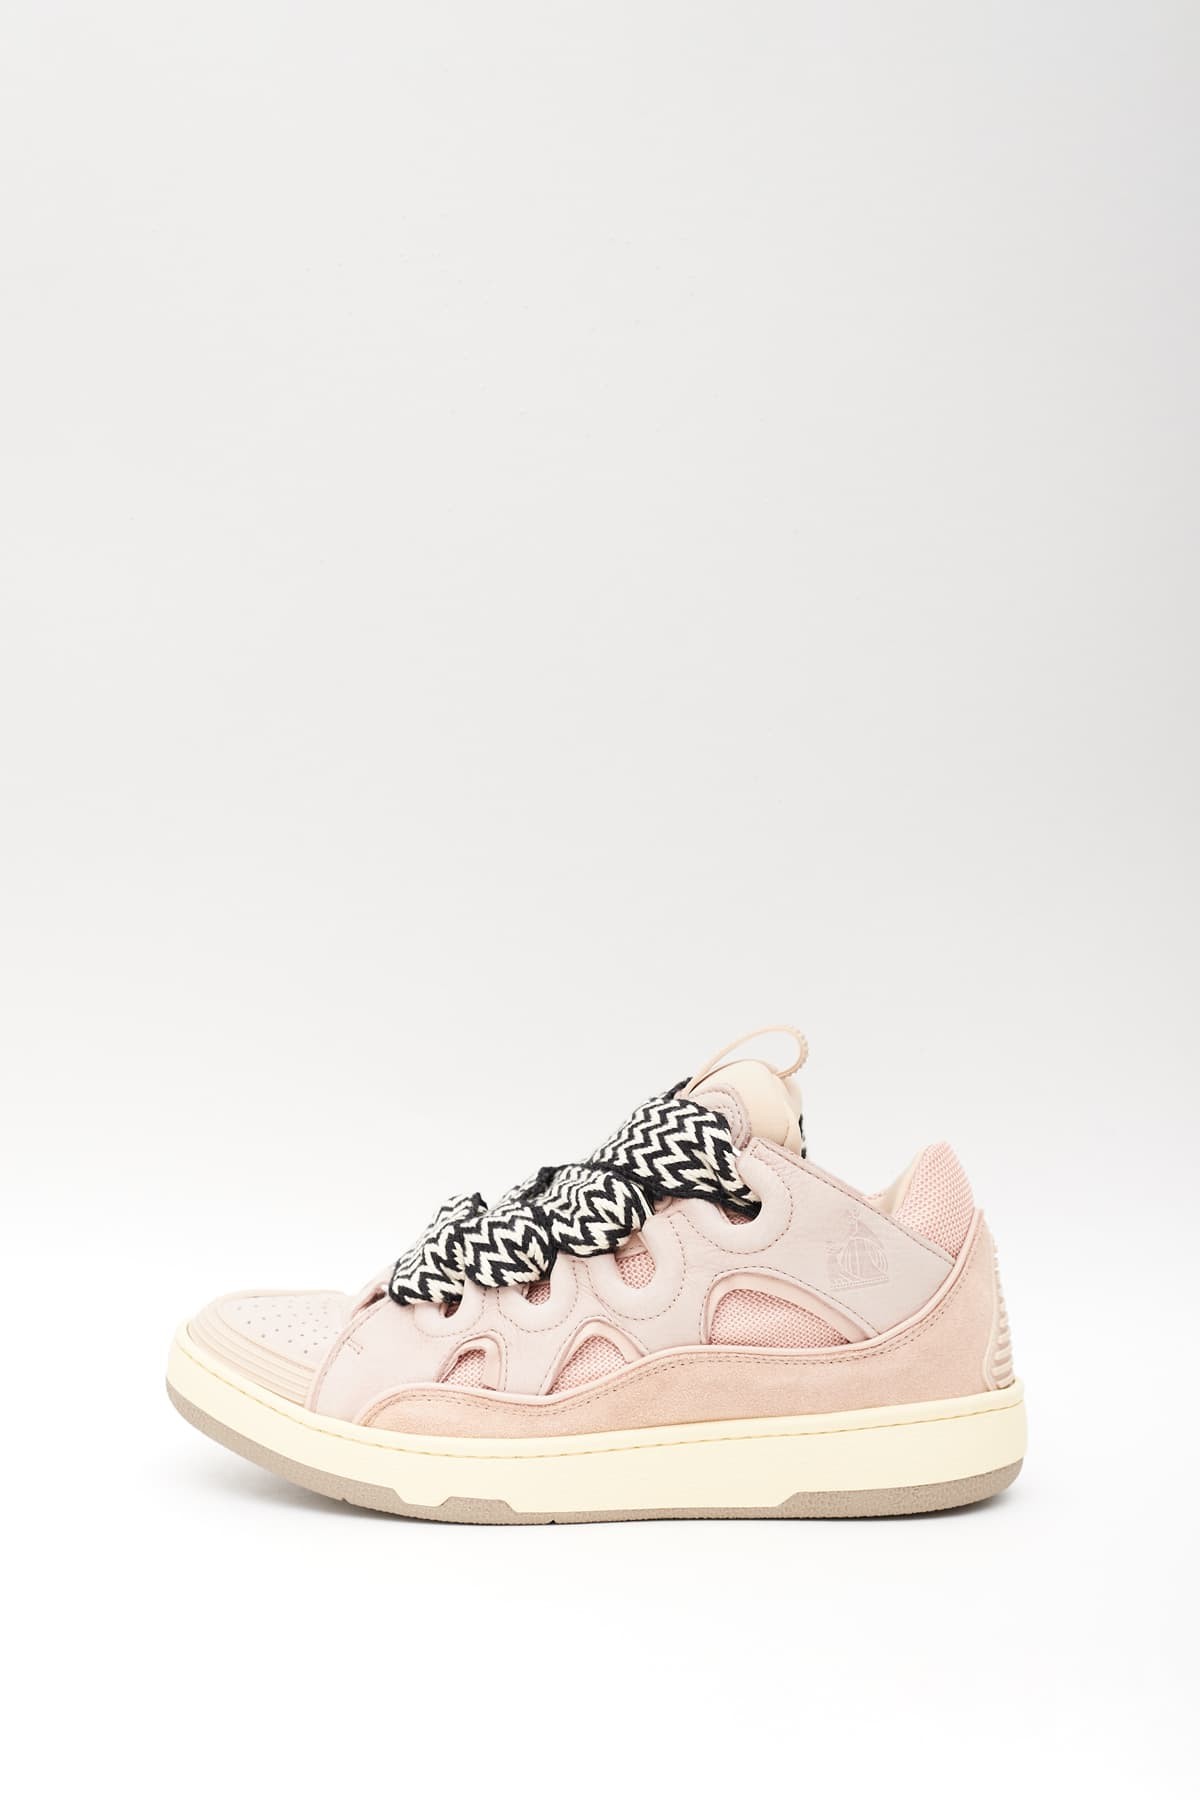 LANVIN PINK LEATHER CURB SNEAKERS IAMNUE